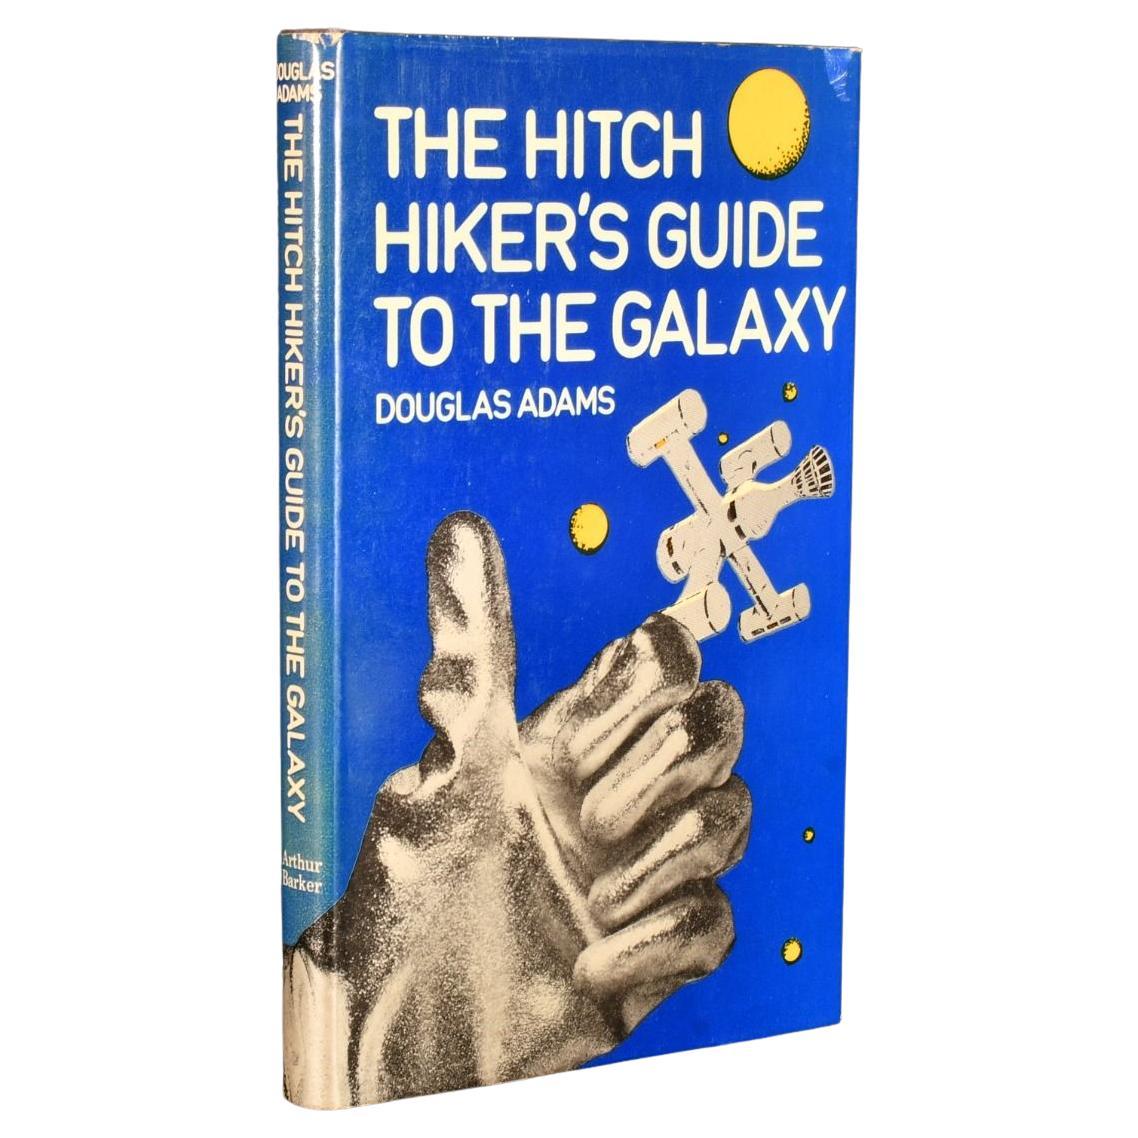 1979 The Hitch Hiker's Guide to the Galaxy im Angebot